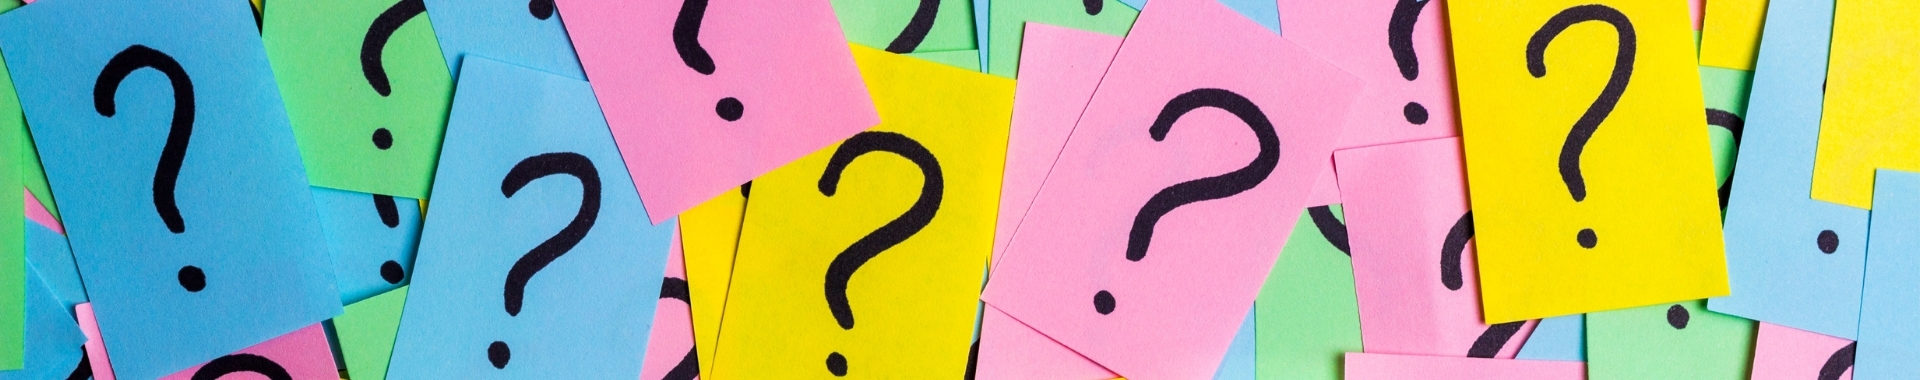 picture of sticky notes with question marks